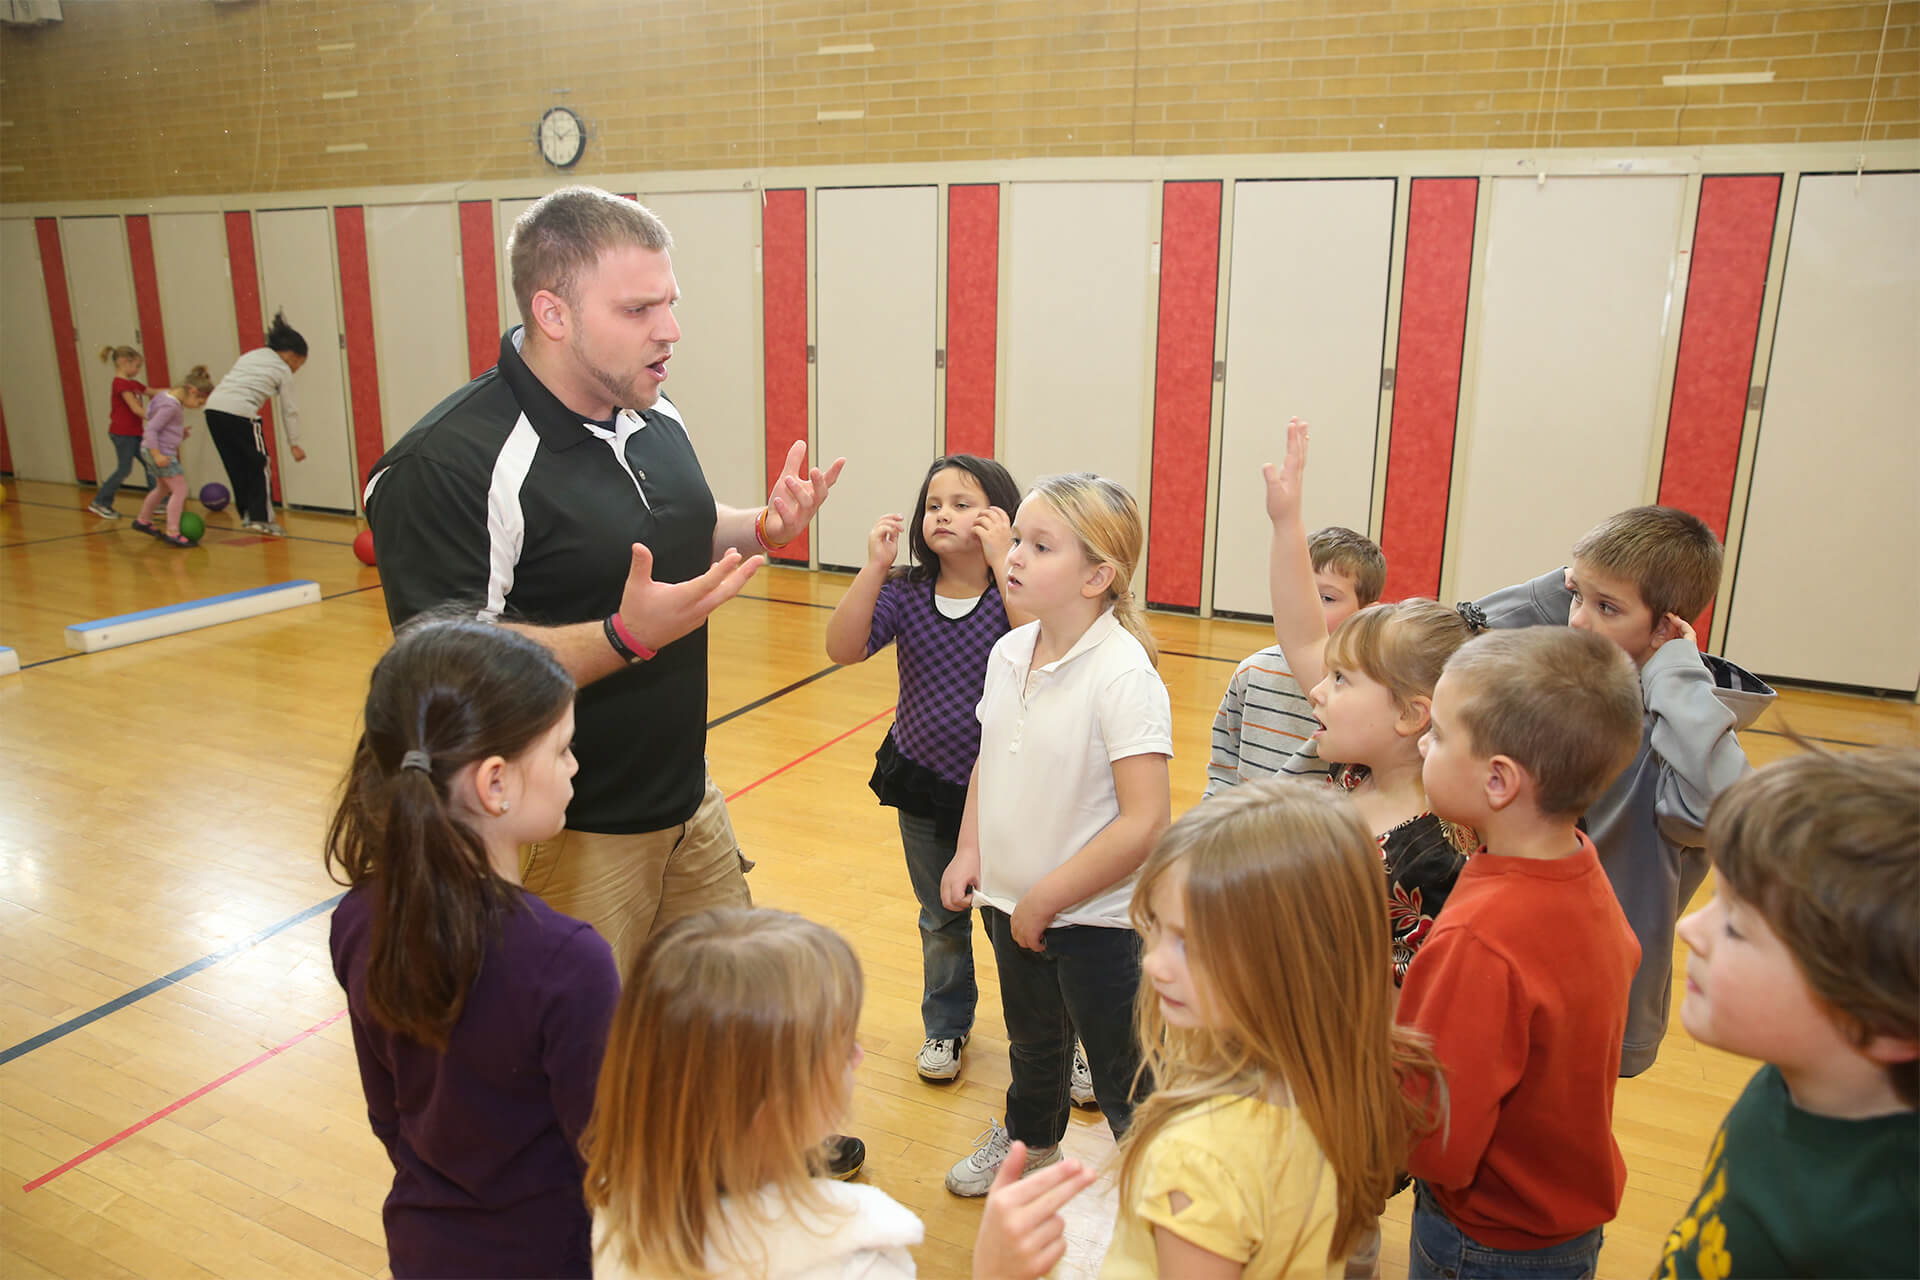 A physical education teacher talks to a group of kids in a gymnasium